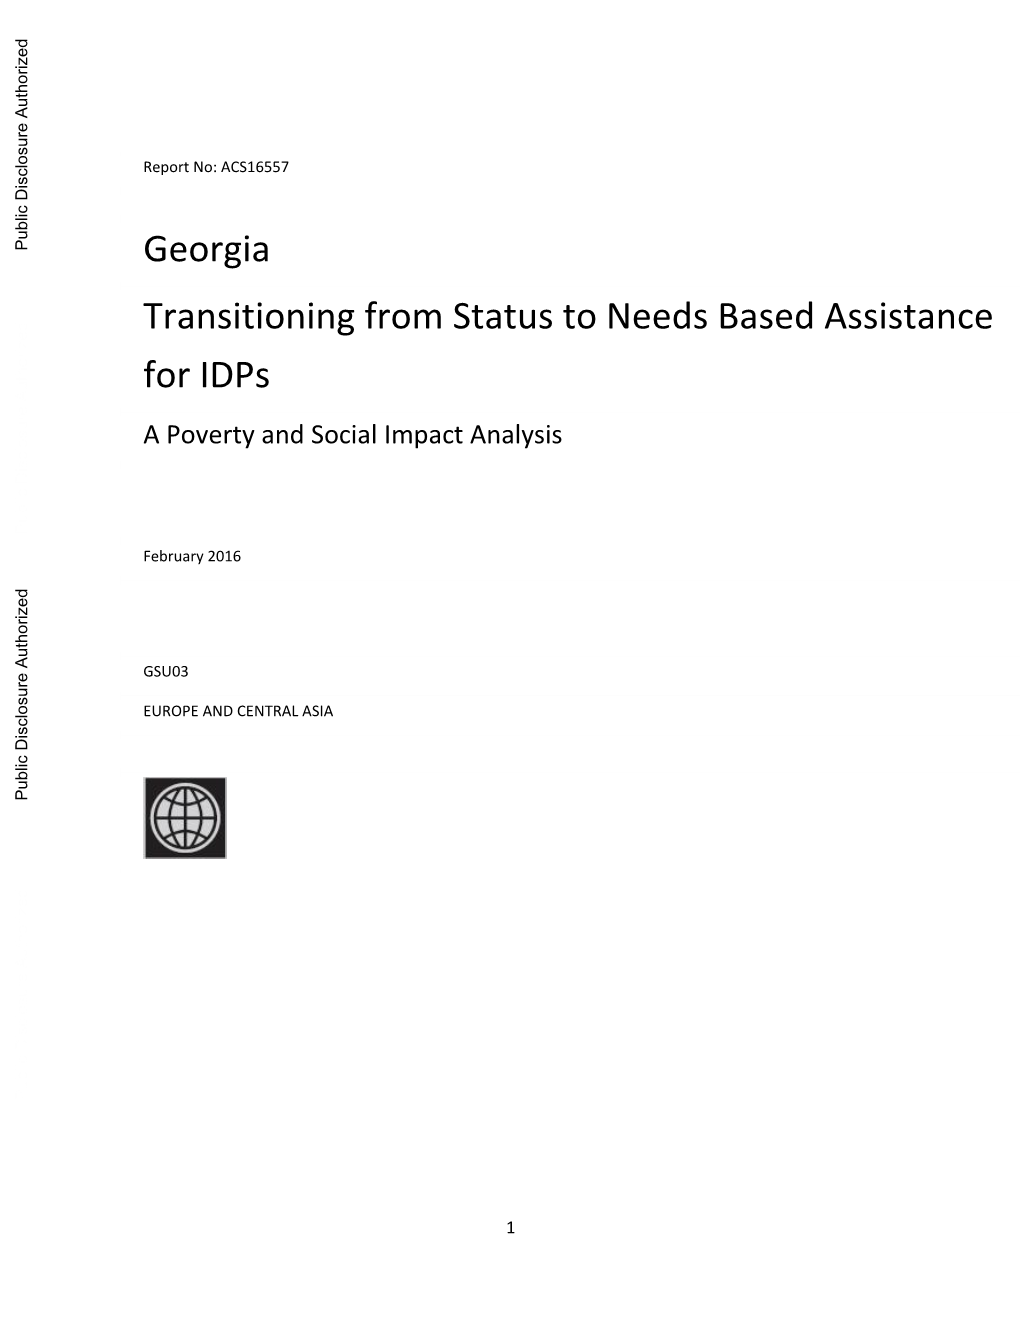 Georgia Transitioning from Status to Needs Based Assistance